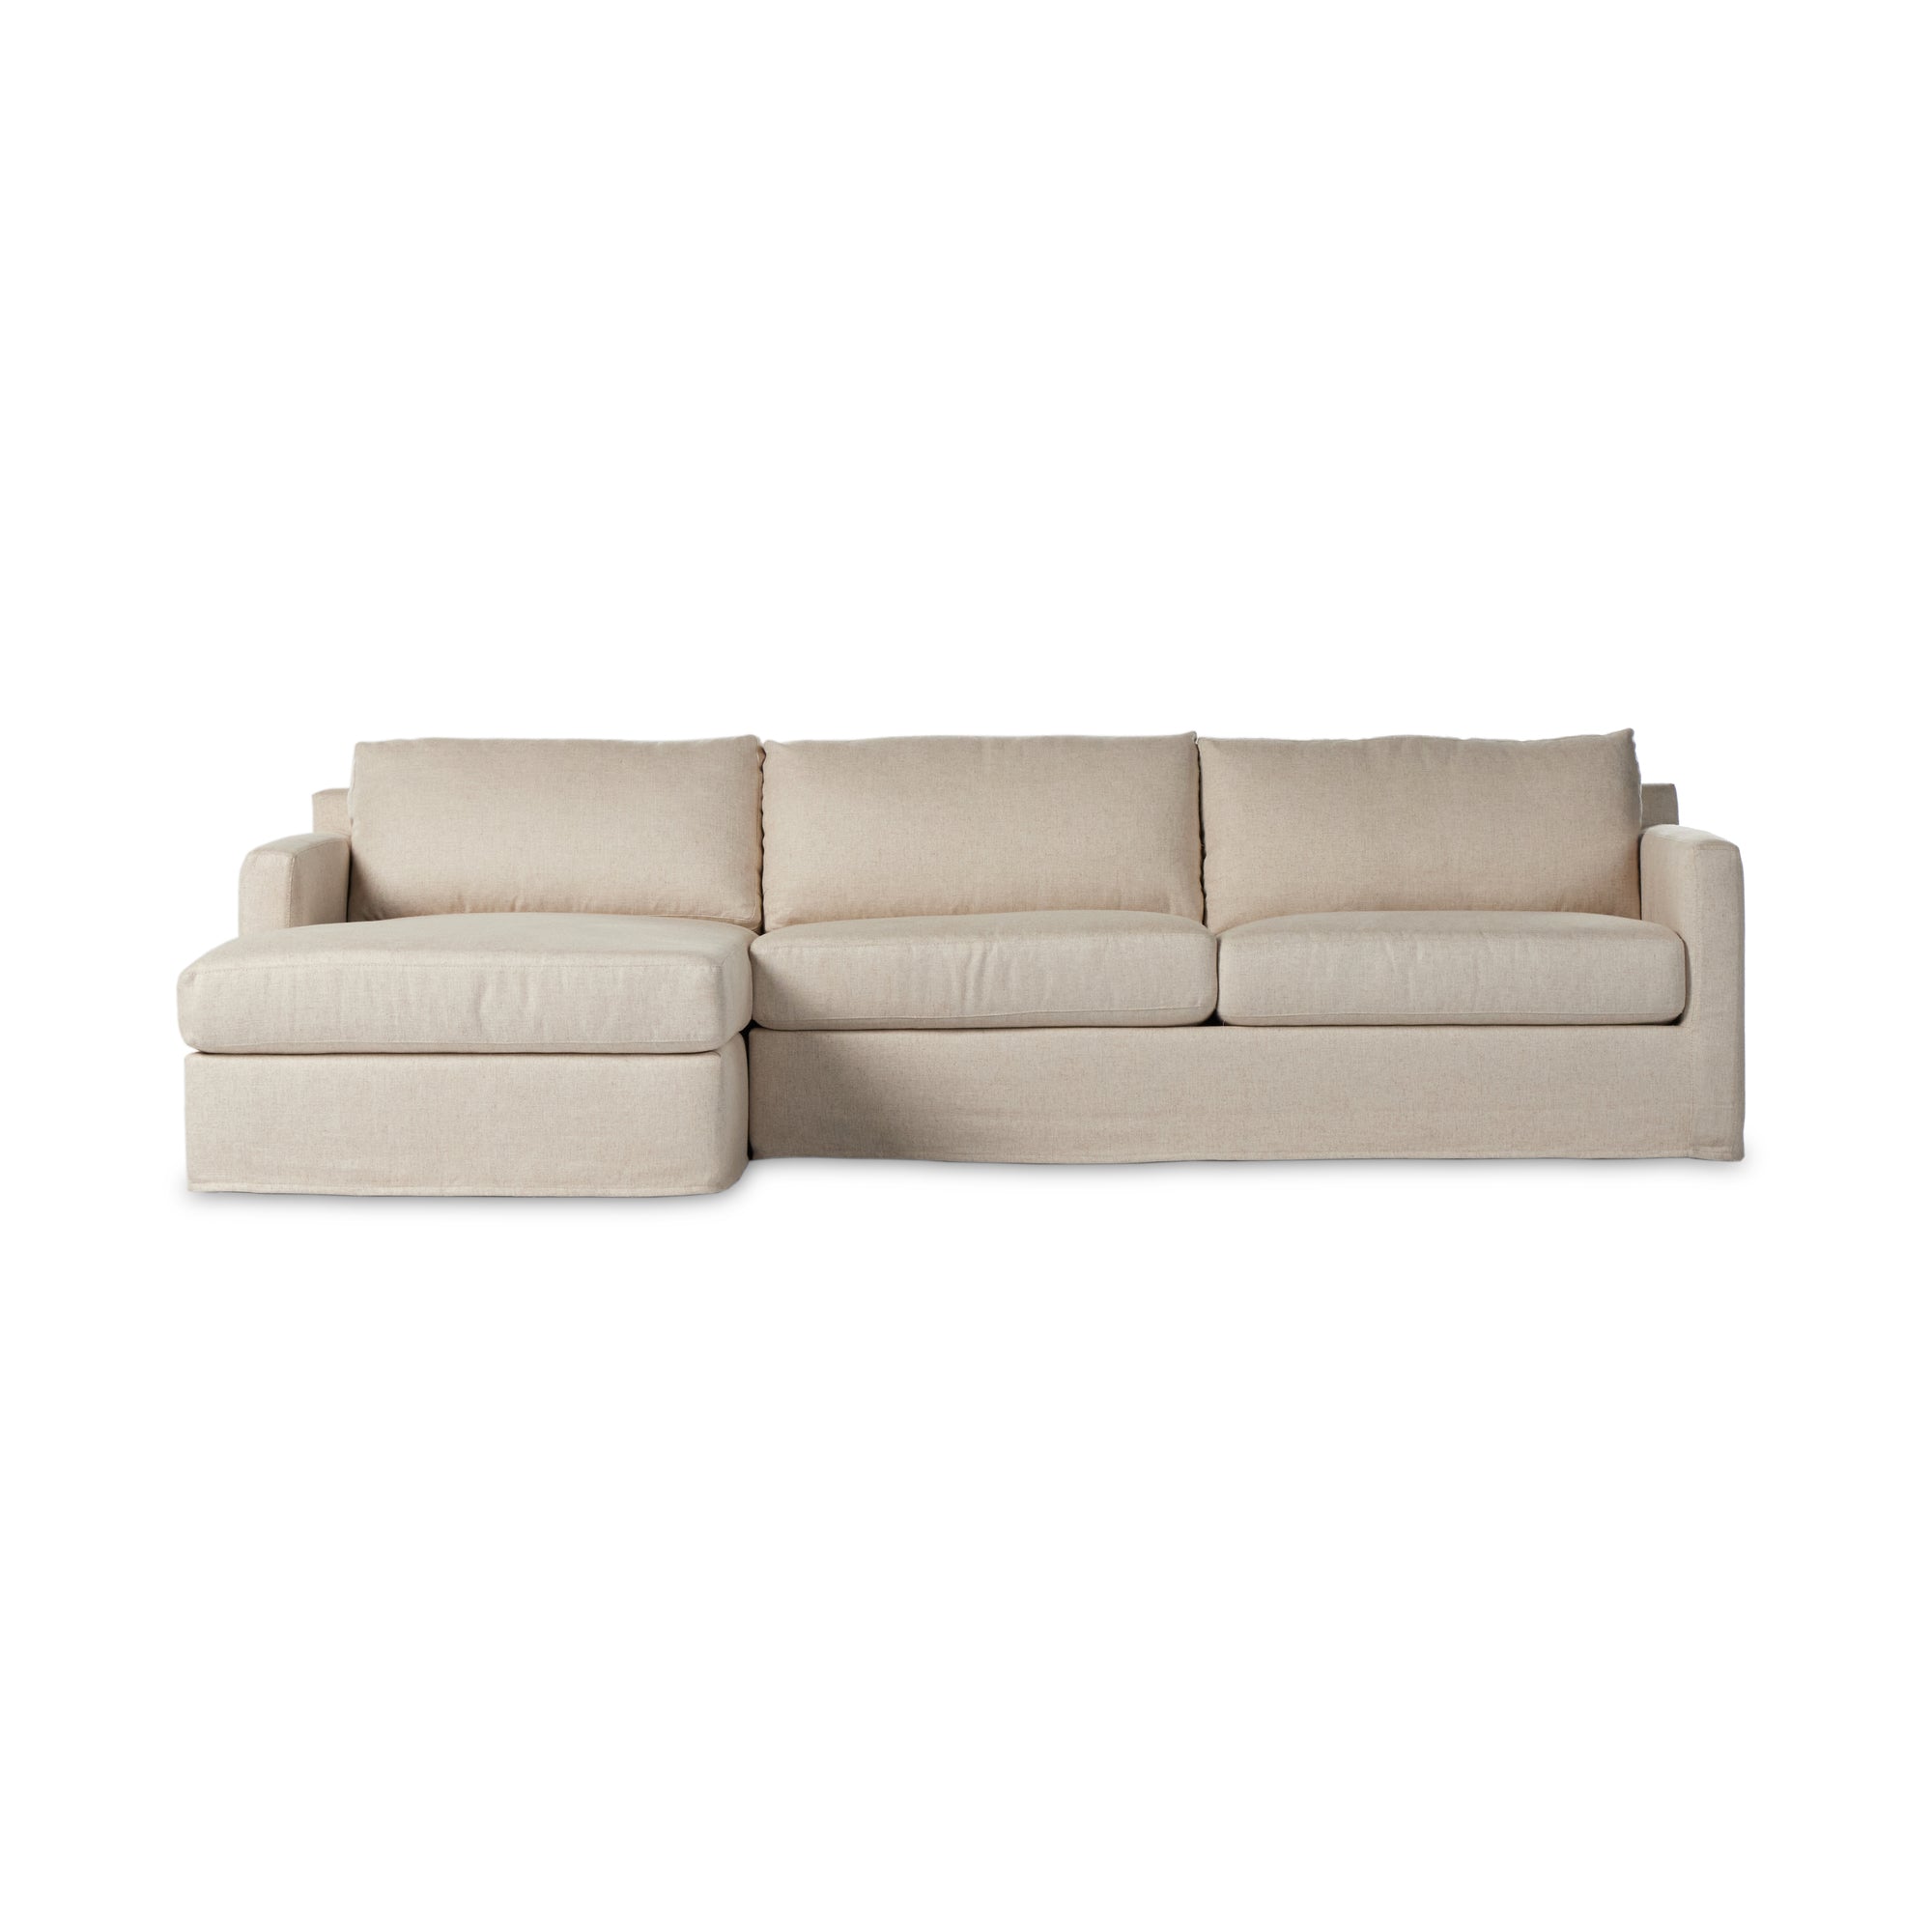 Margo 2-piece Slipcover Sectional